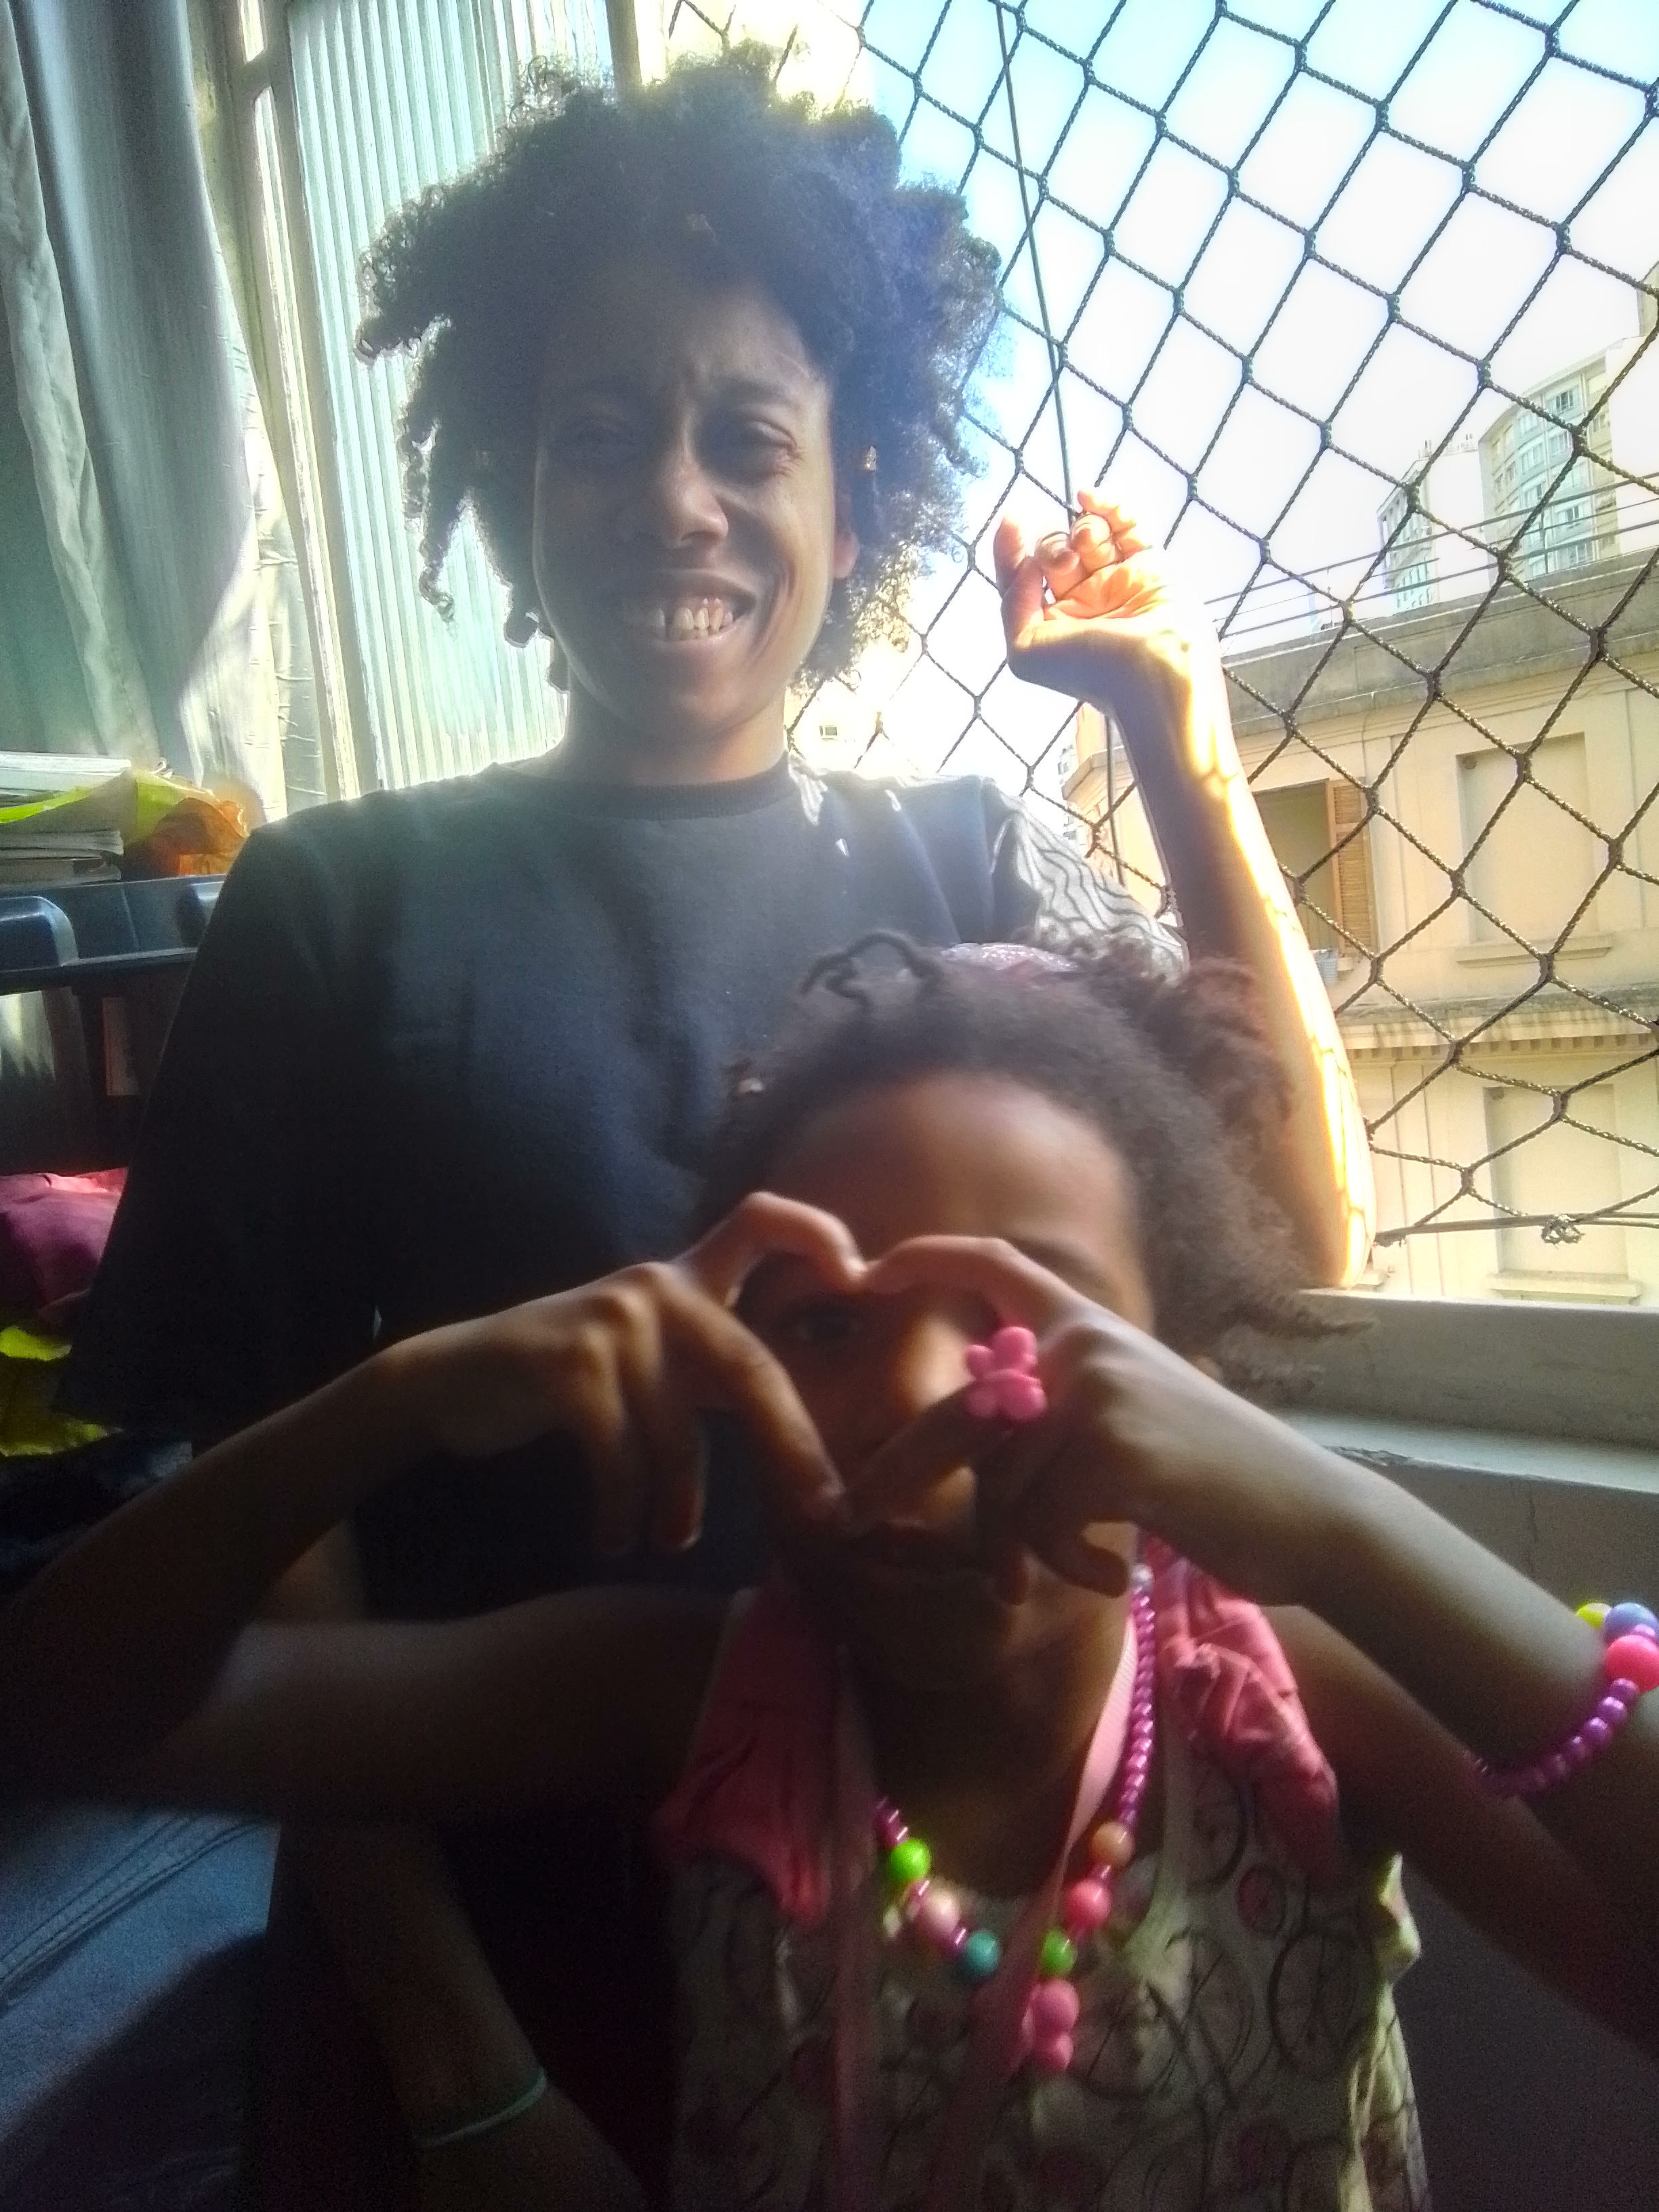 World Ruler Sher Trott Bailey and first princess Keilah Trott Bailey take a photo together and Keilah uses her fingers to make a heart over her face while mom stands at the window at our roach hotel in Sao Paulo